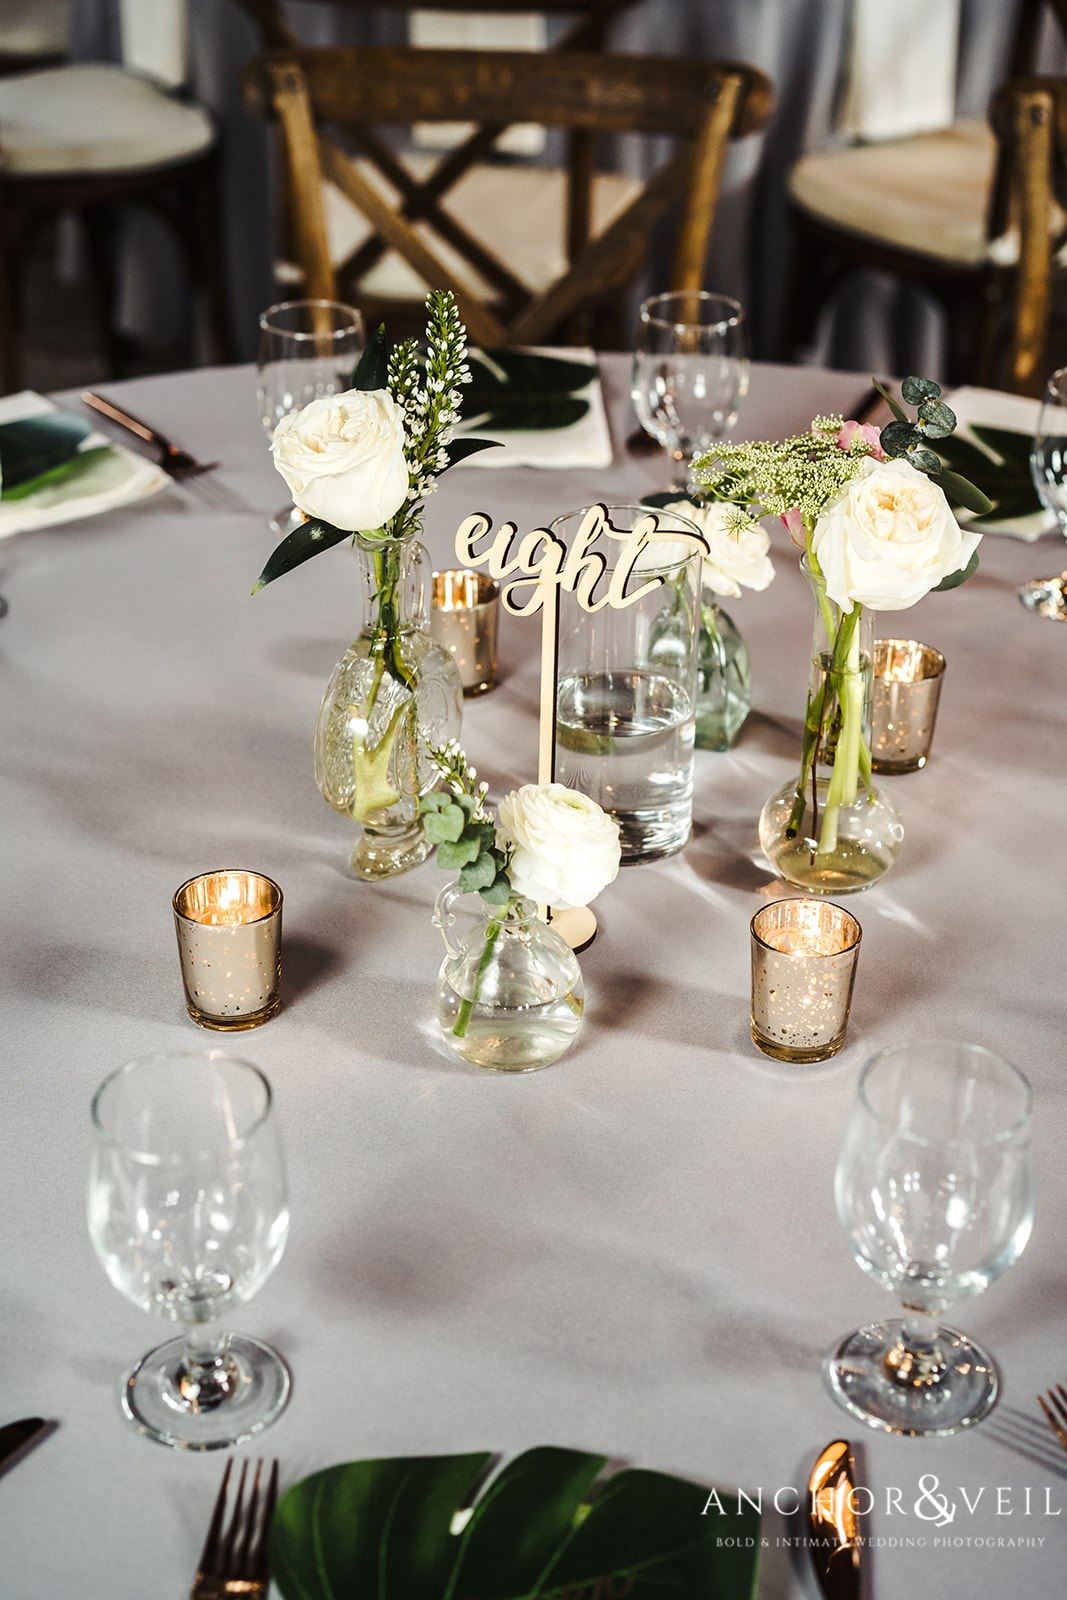 The table setting at the Boone Hall Plantation Wedding 